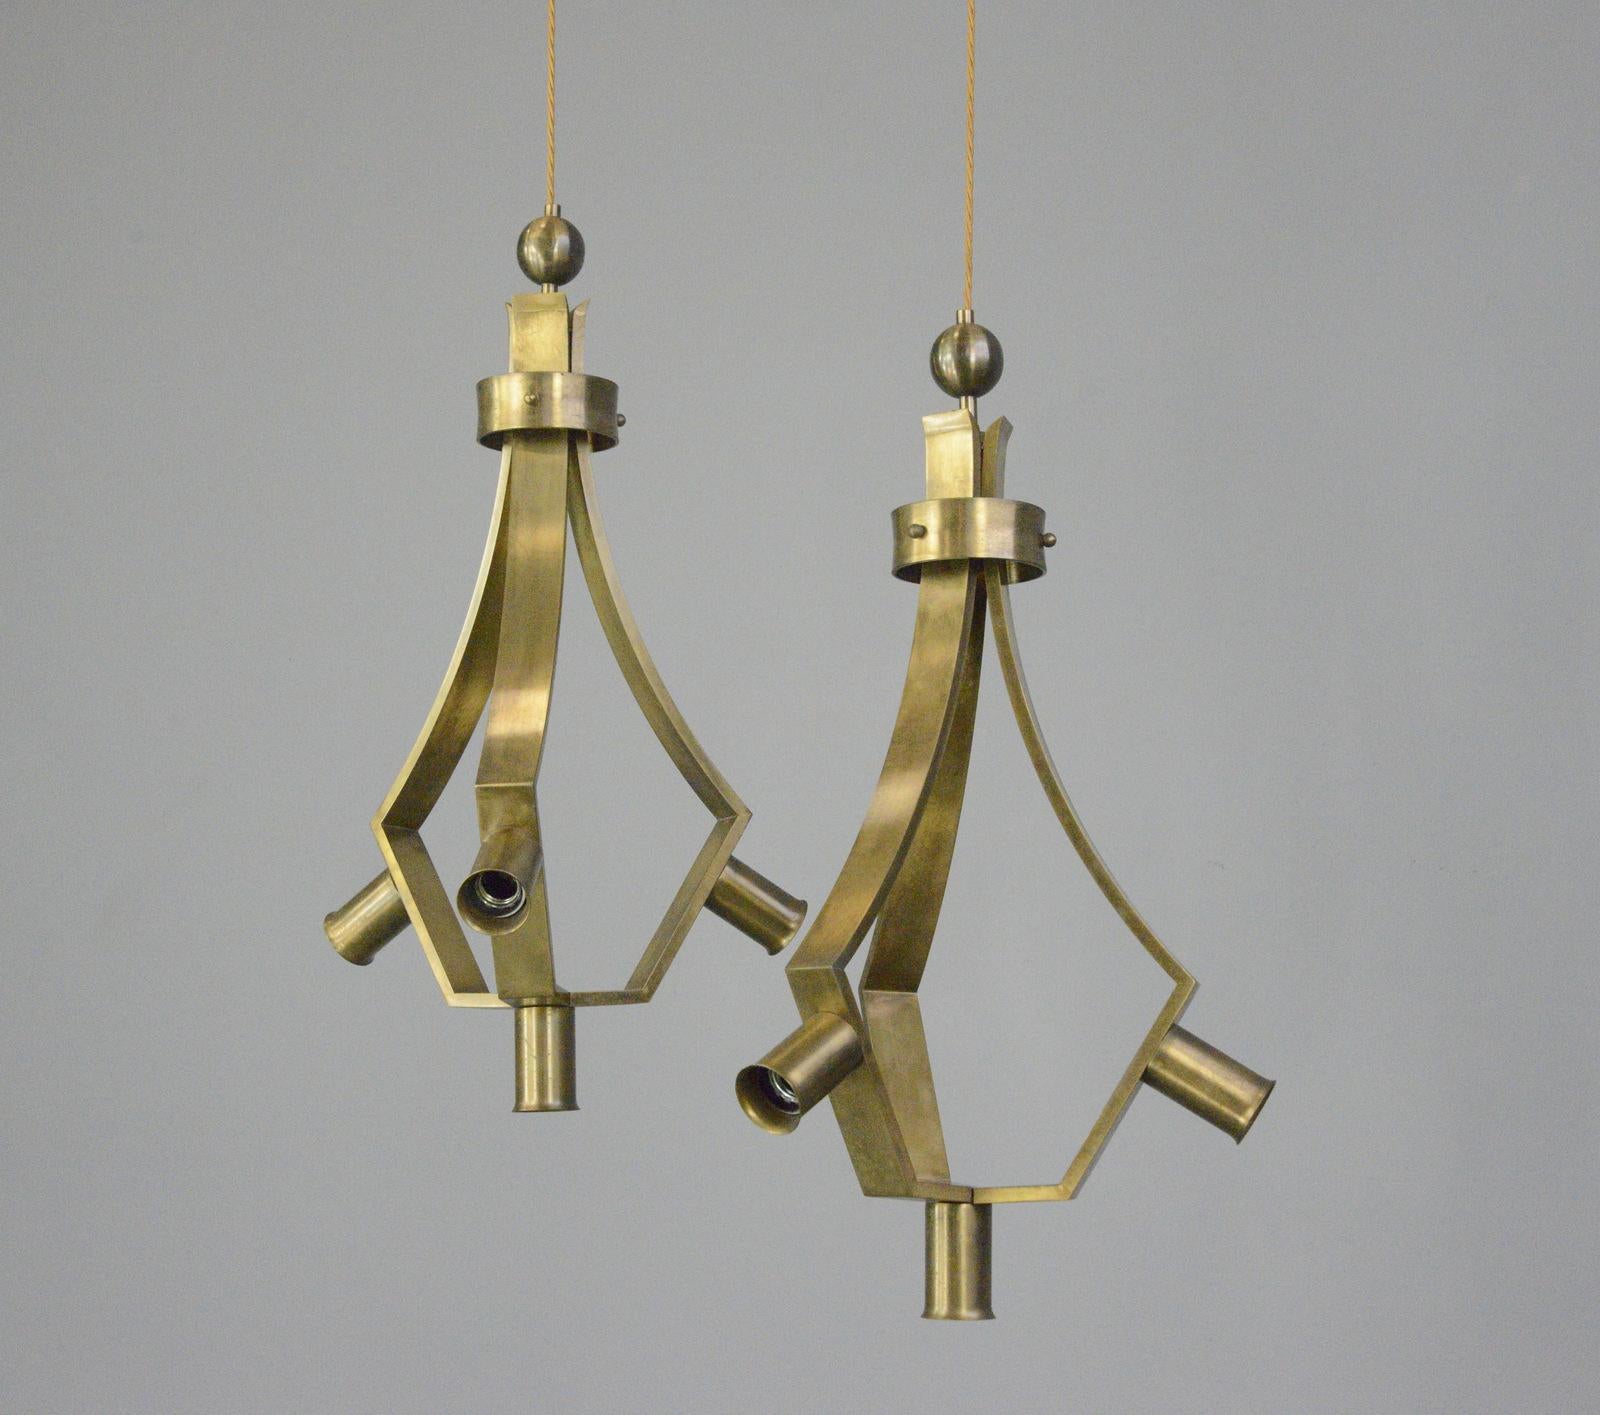 Brass Brutalist Pendant Lights by Schonwandt circa 1970s

- Takes 4x E27 fitting bulbs
- Solid brass
- Suspends from the cable
- German ~ 1970s
- 36cm wide x 70cm tall

Condition Report

Fully rewired with modern electrical components,